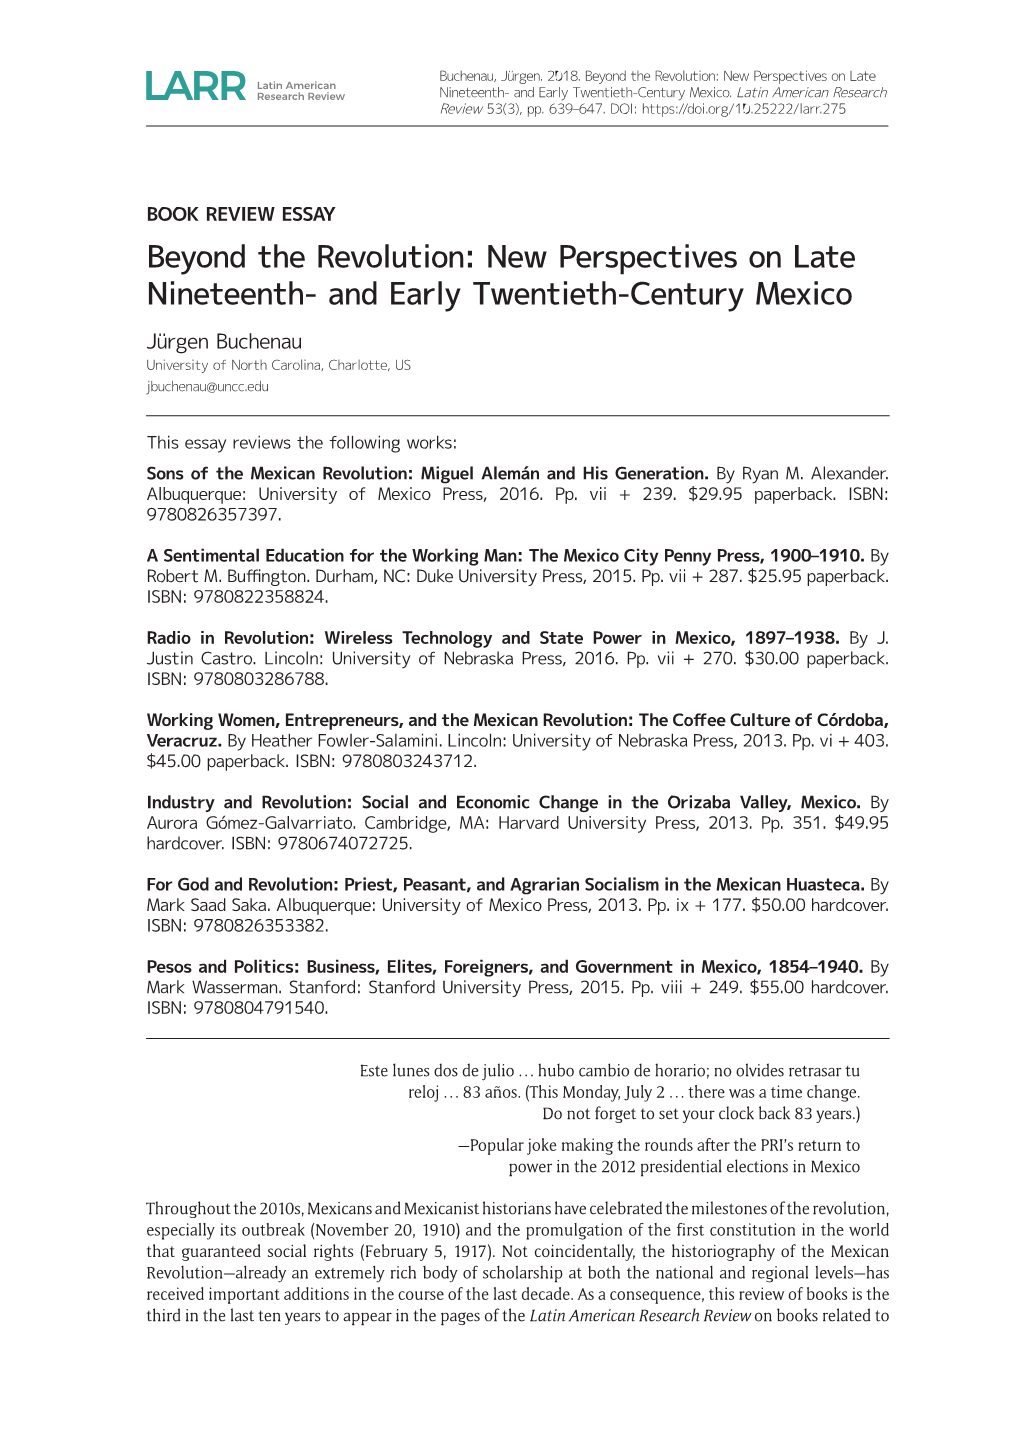 Beyond the Revolution: New Perspectives on Late Nineteenth- and Early Twentieth-Century Mexico